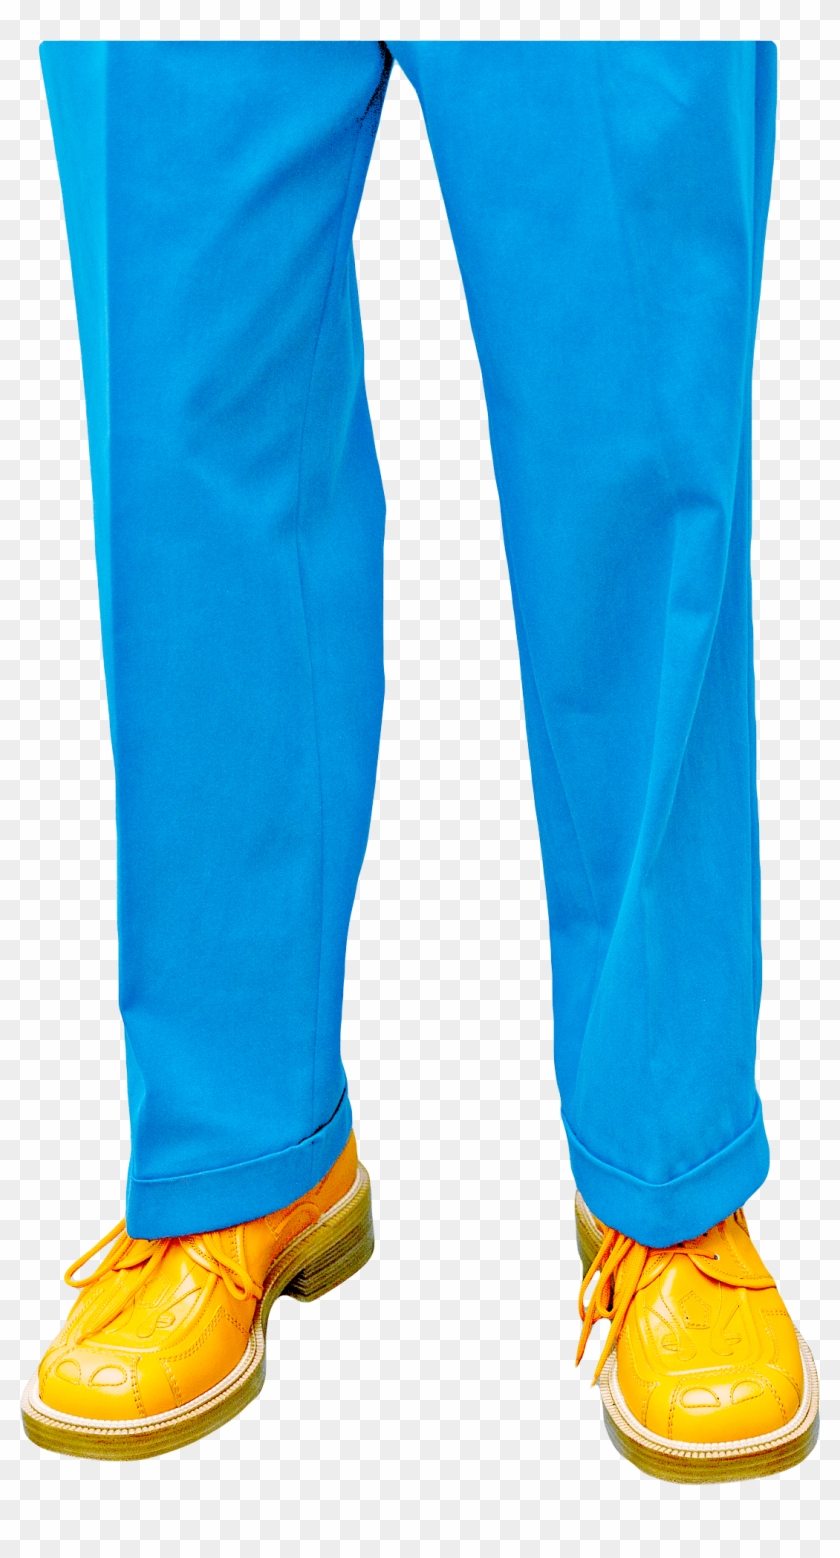 Blue Trousers And Yellow Shoes - Pants And Shoes Png #1172698